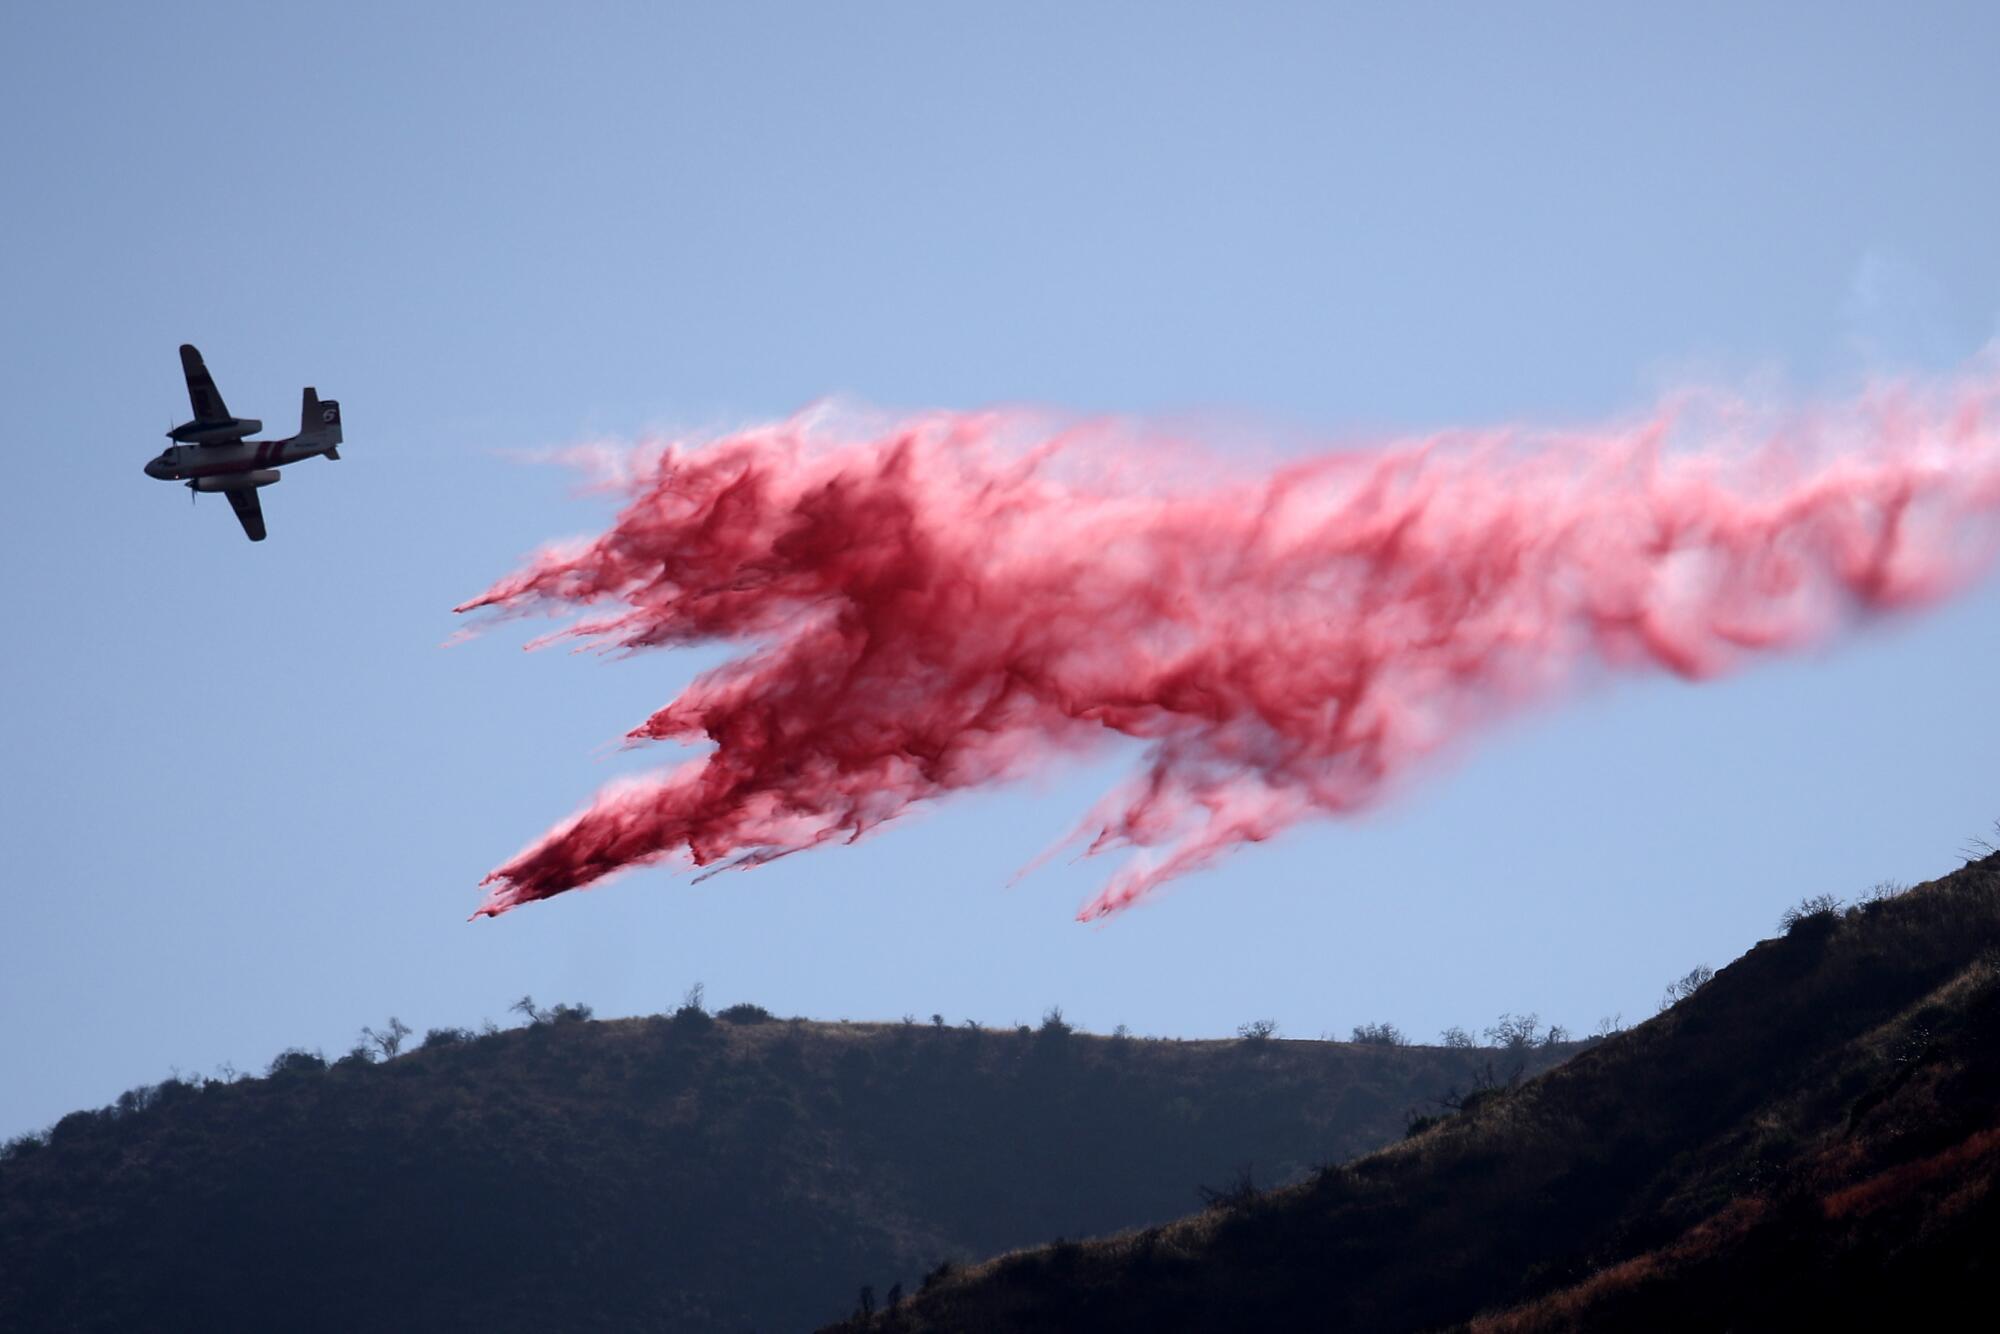 An air tanker banks away after dropping its load of pink fire retardant on the Gulch fire burning near the San Gabriel Dam.